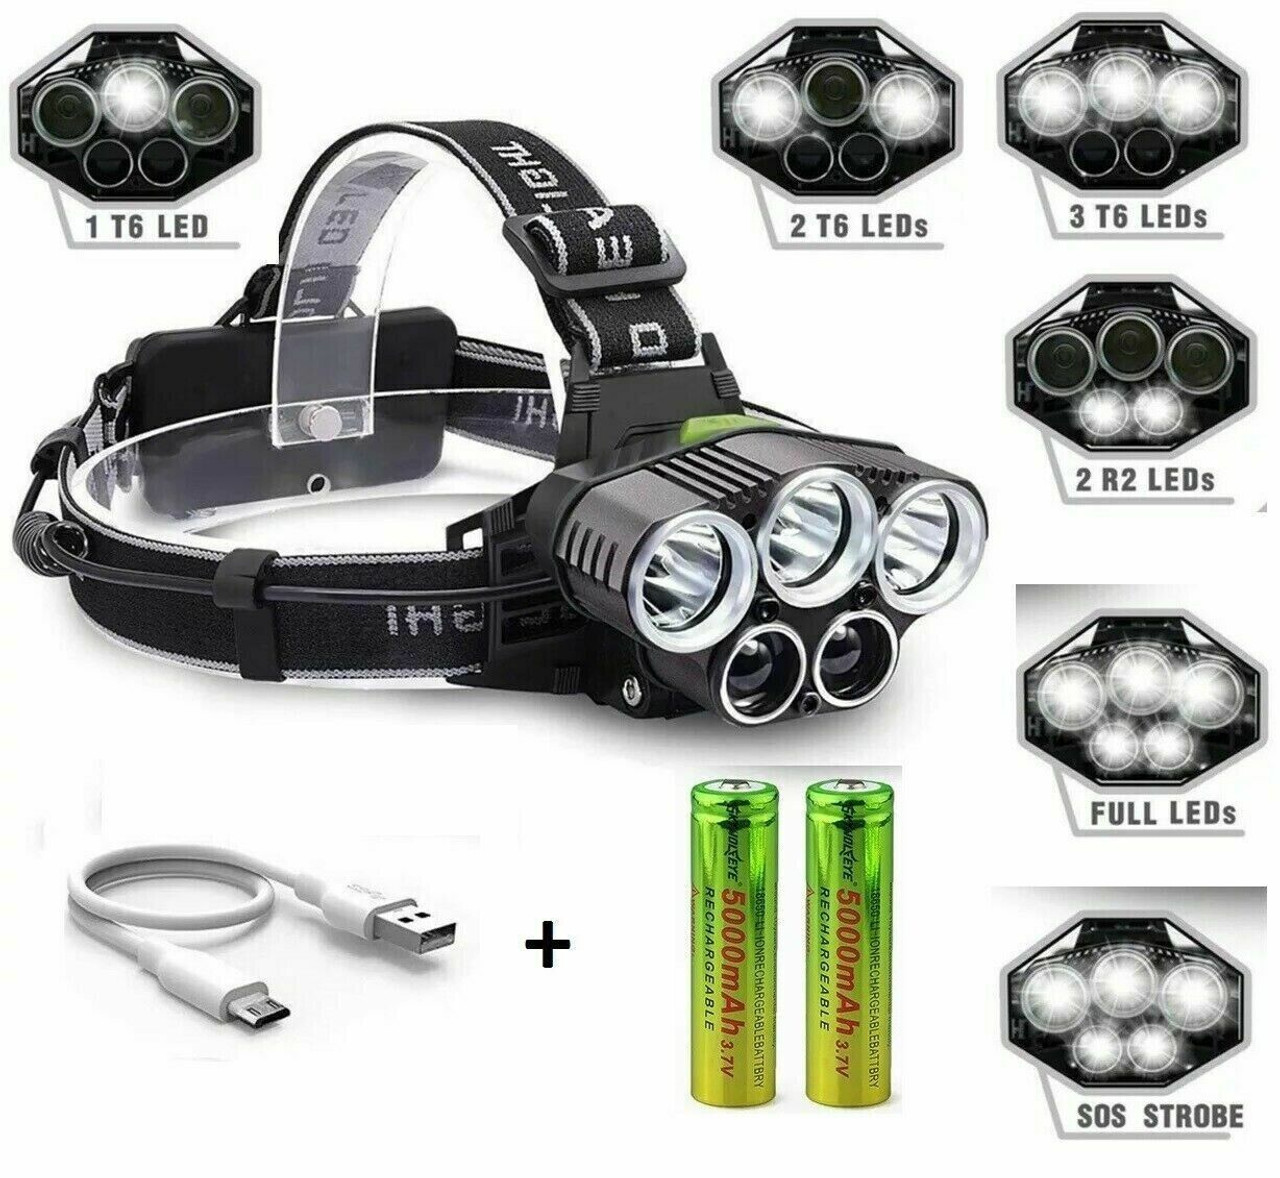 250000LM 5X T6 LED Headlamp Rechargeable Head Light Flashlight Torch Lamp USA